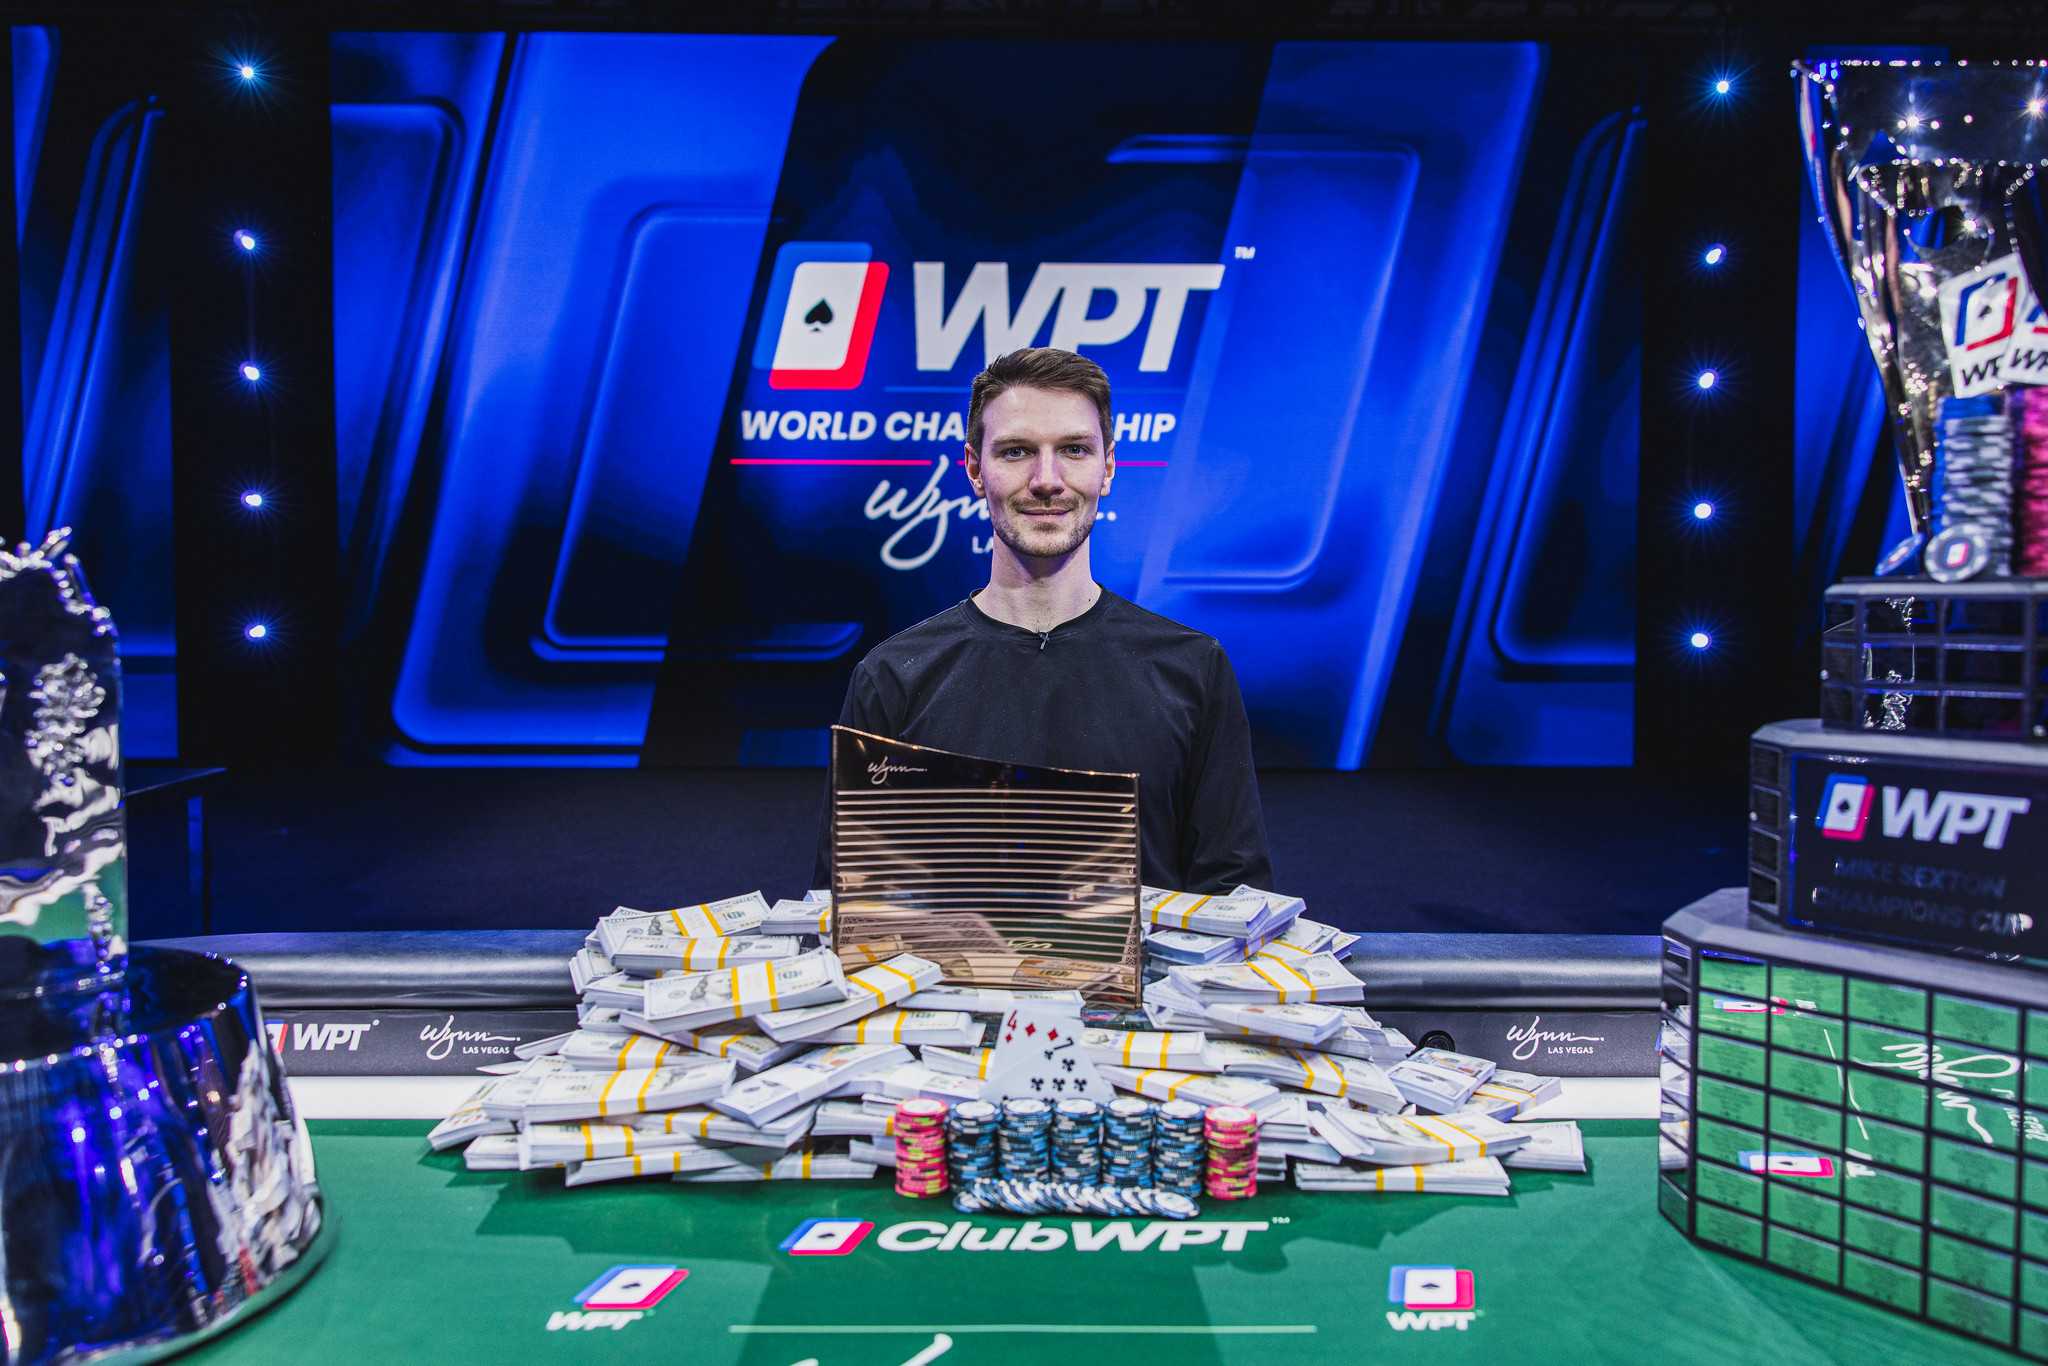 Photo of Eliot Hudon Beats Out 2,960 Entrants to Win WPT World Championship for $4.1 Million